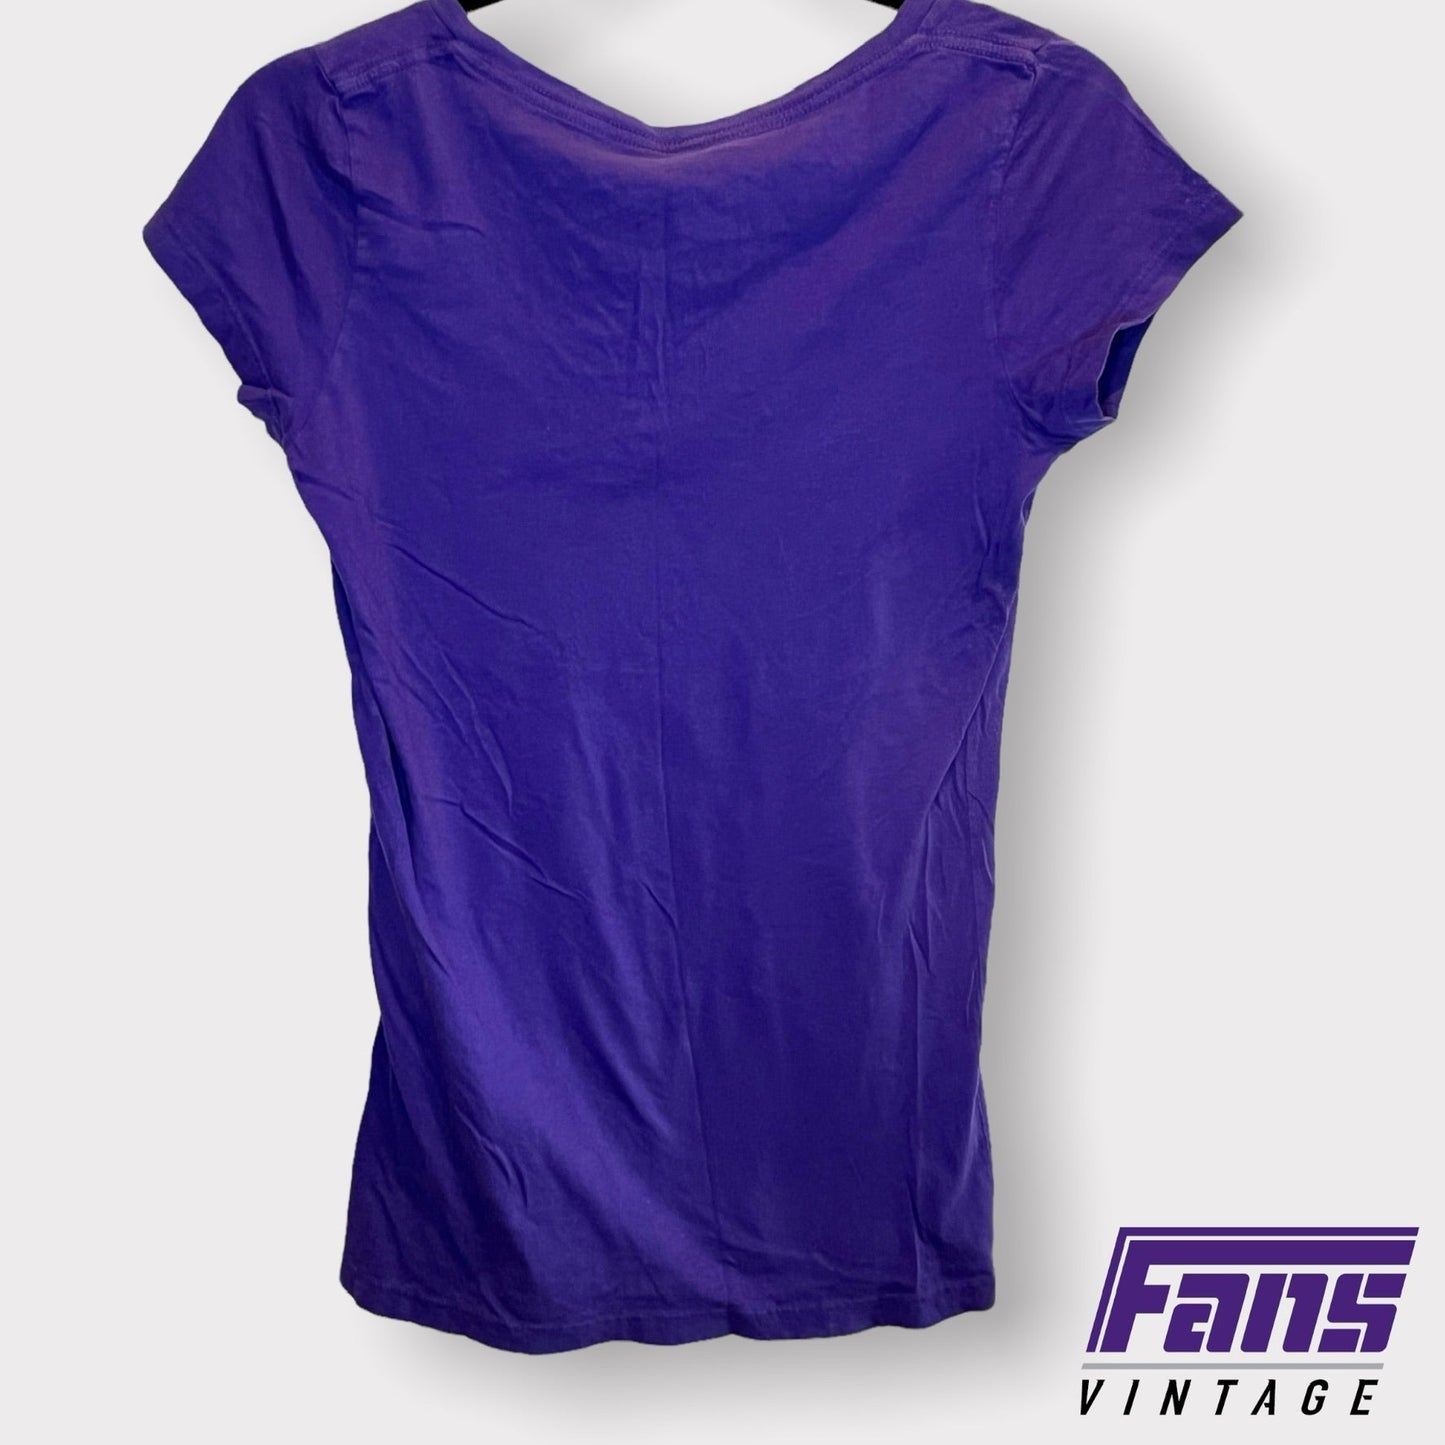 TCU ESPN College Game Day Women's V-Neck Tee - Discounted!